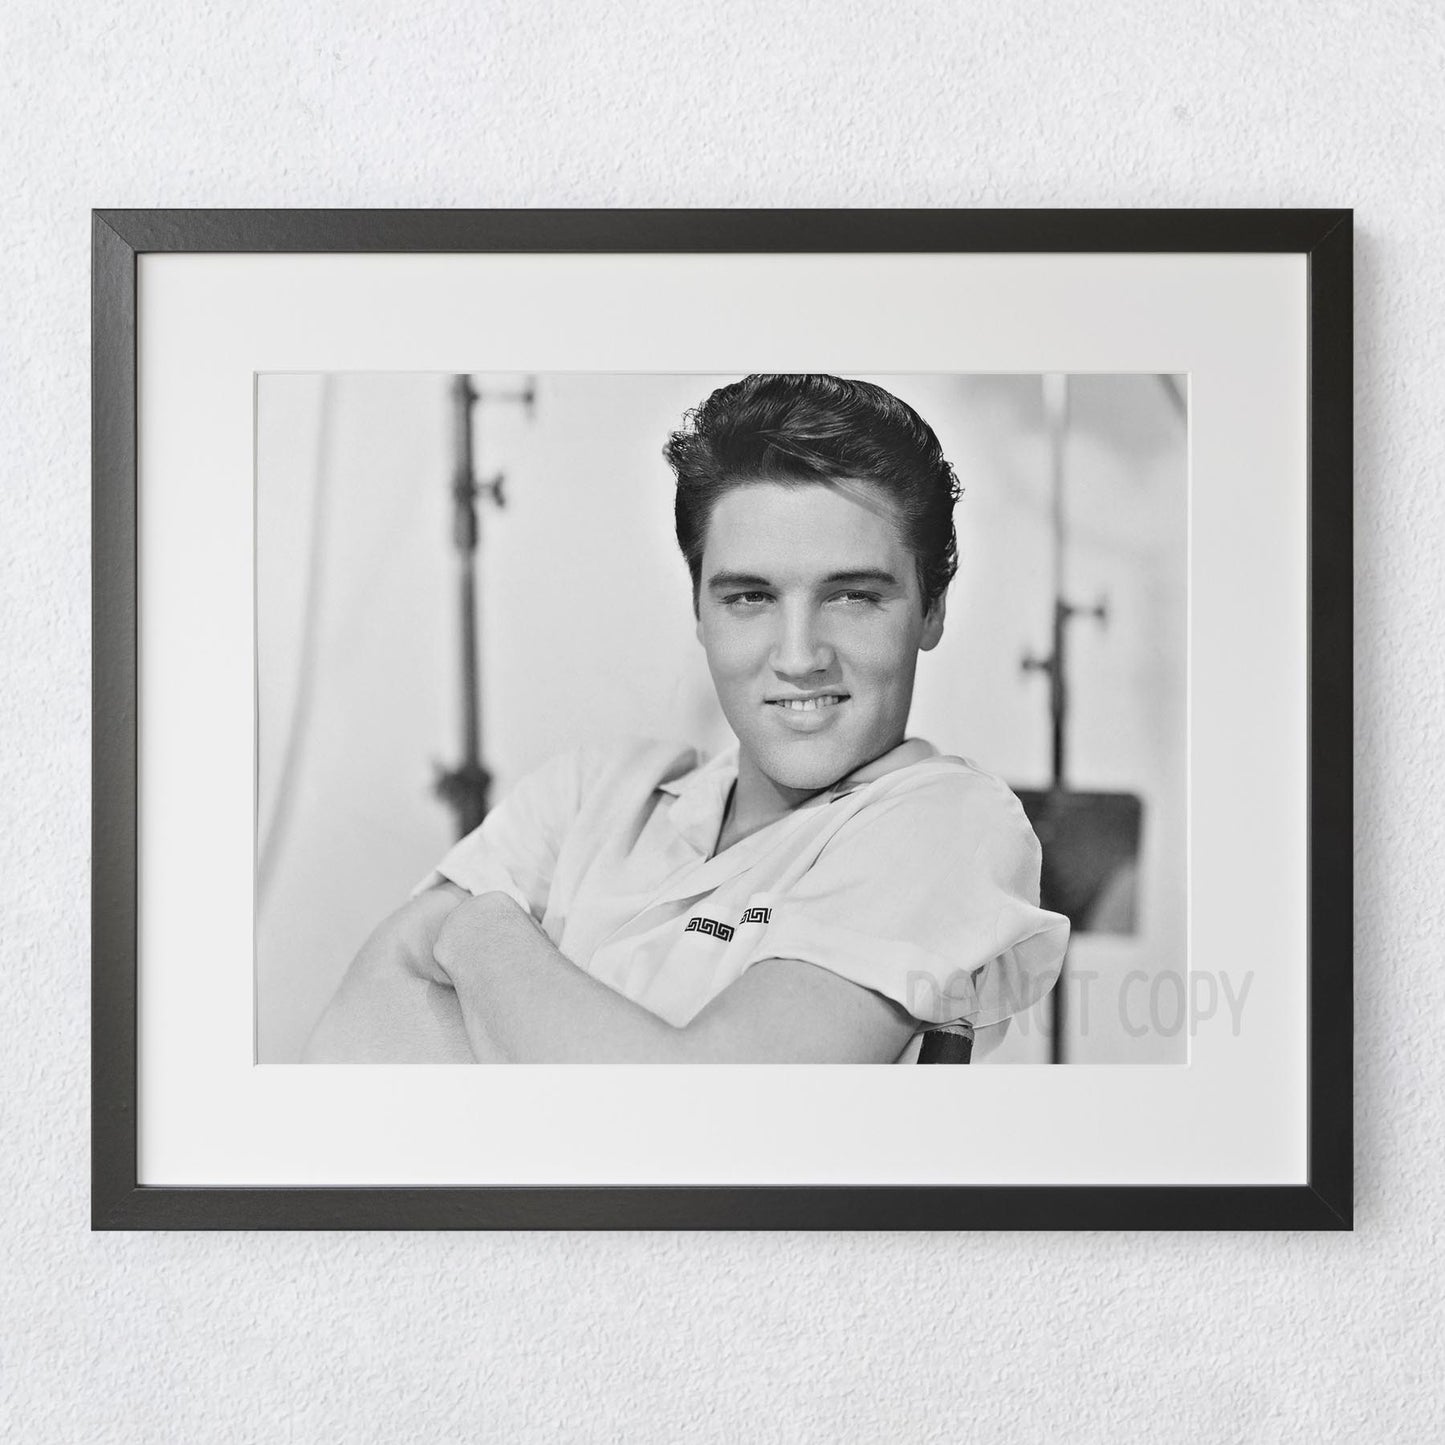 Elvis with a smile